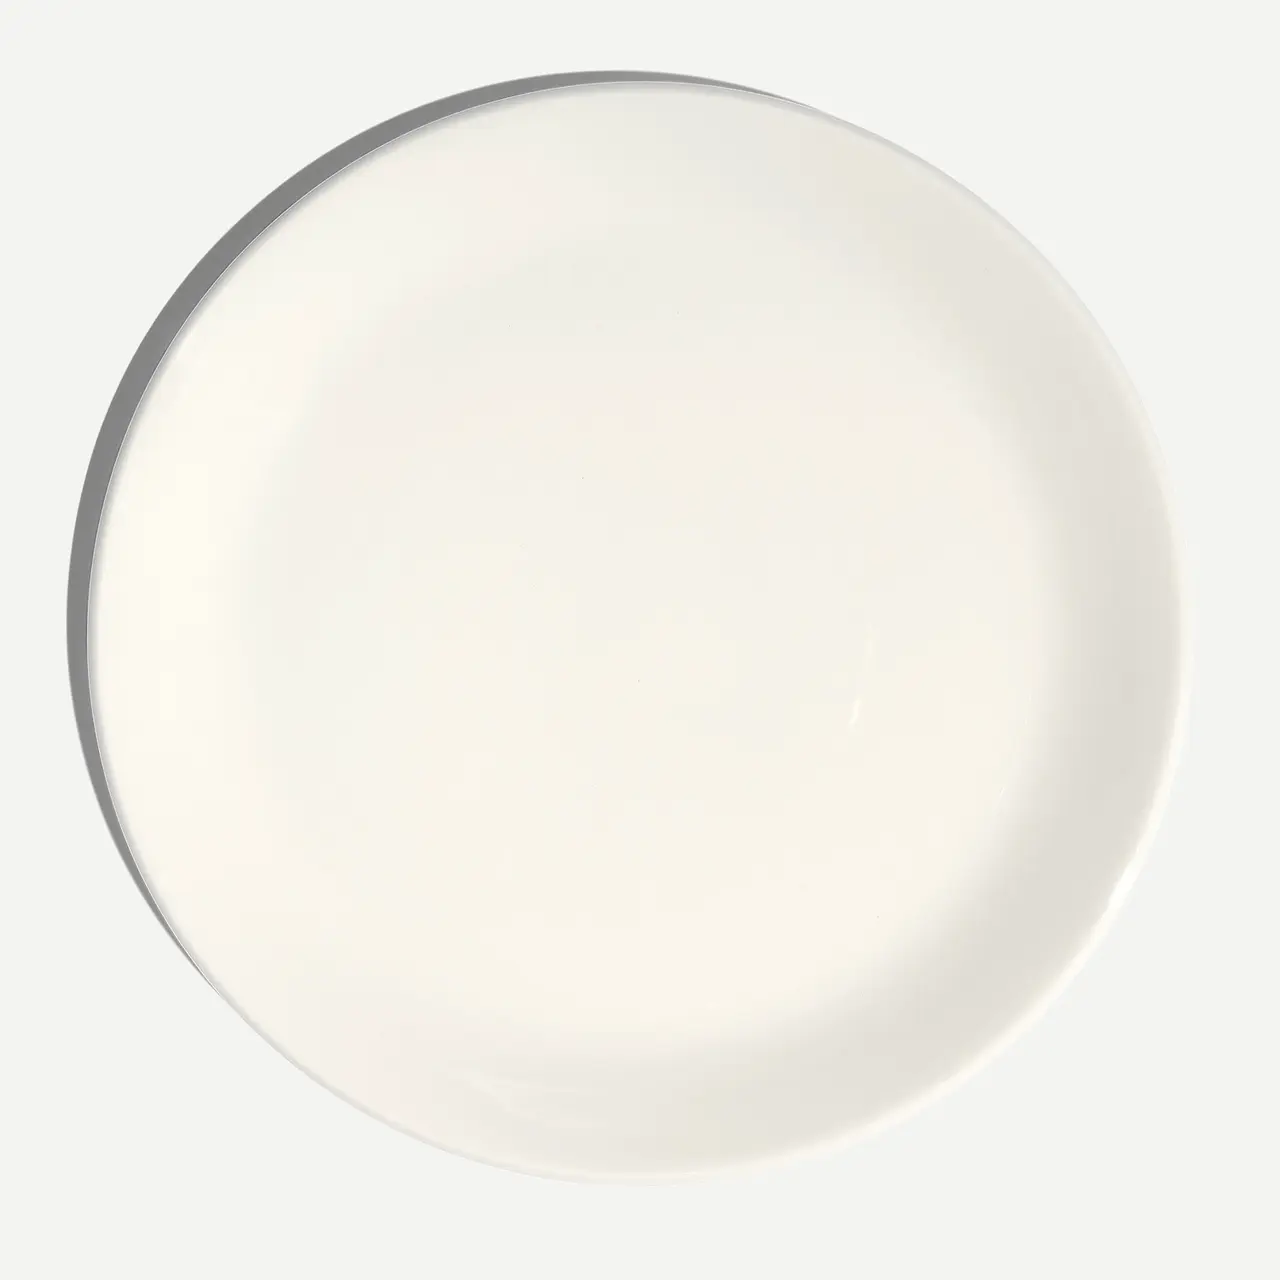 An empty white round plate is presented against a light background.